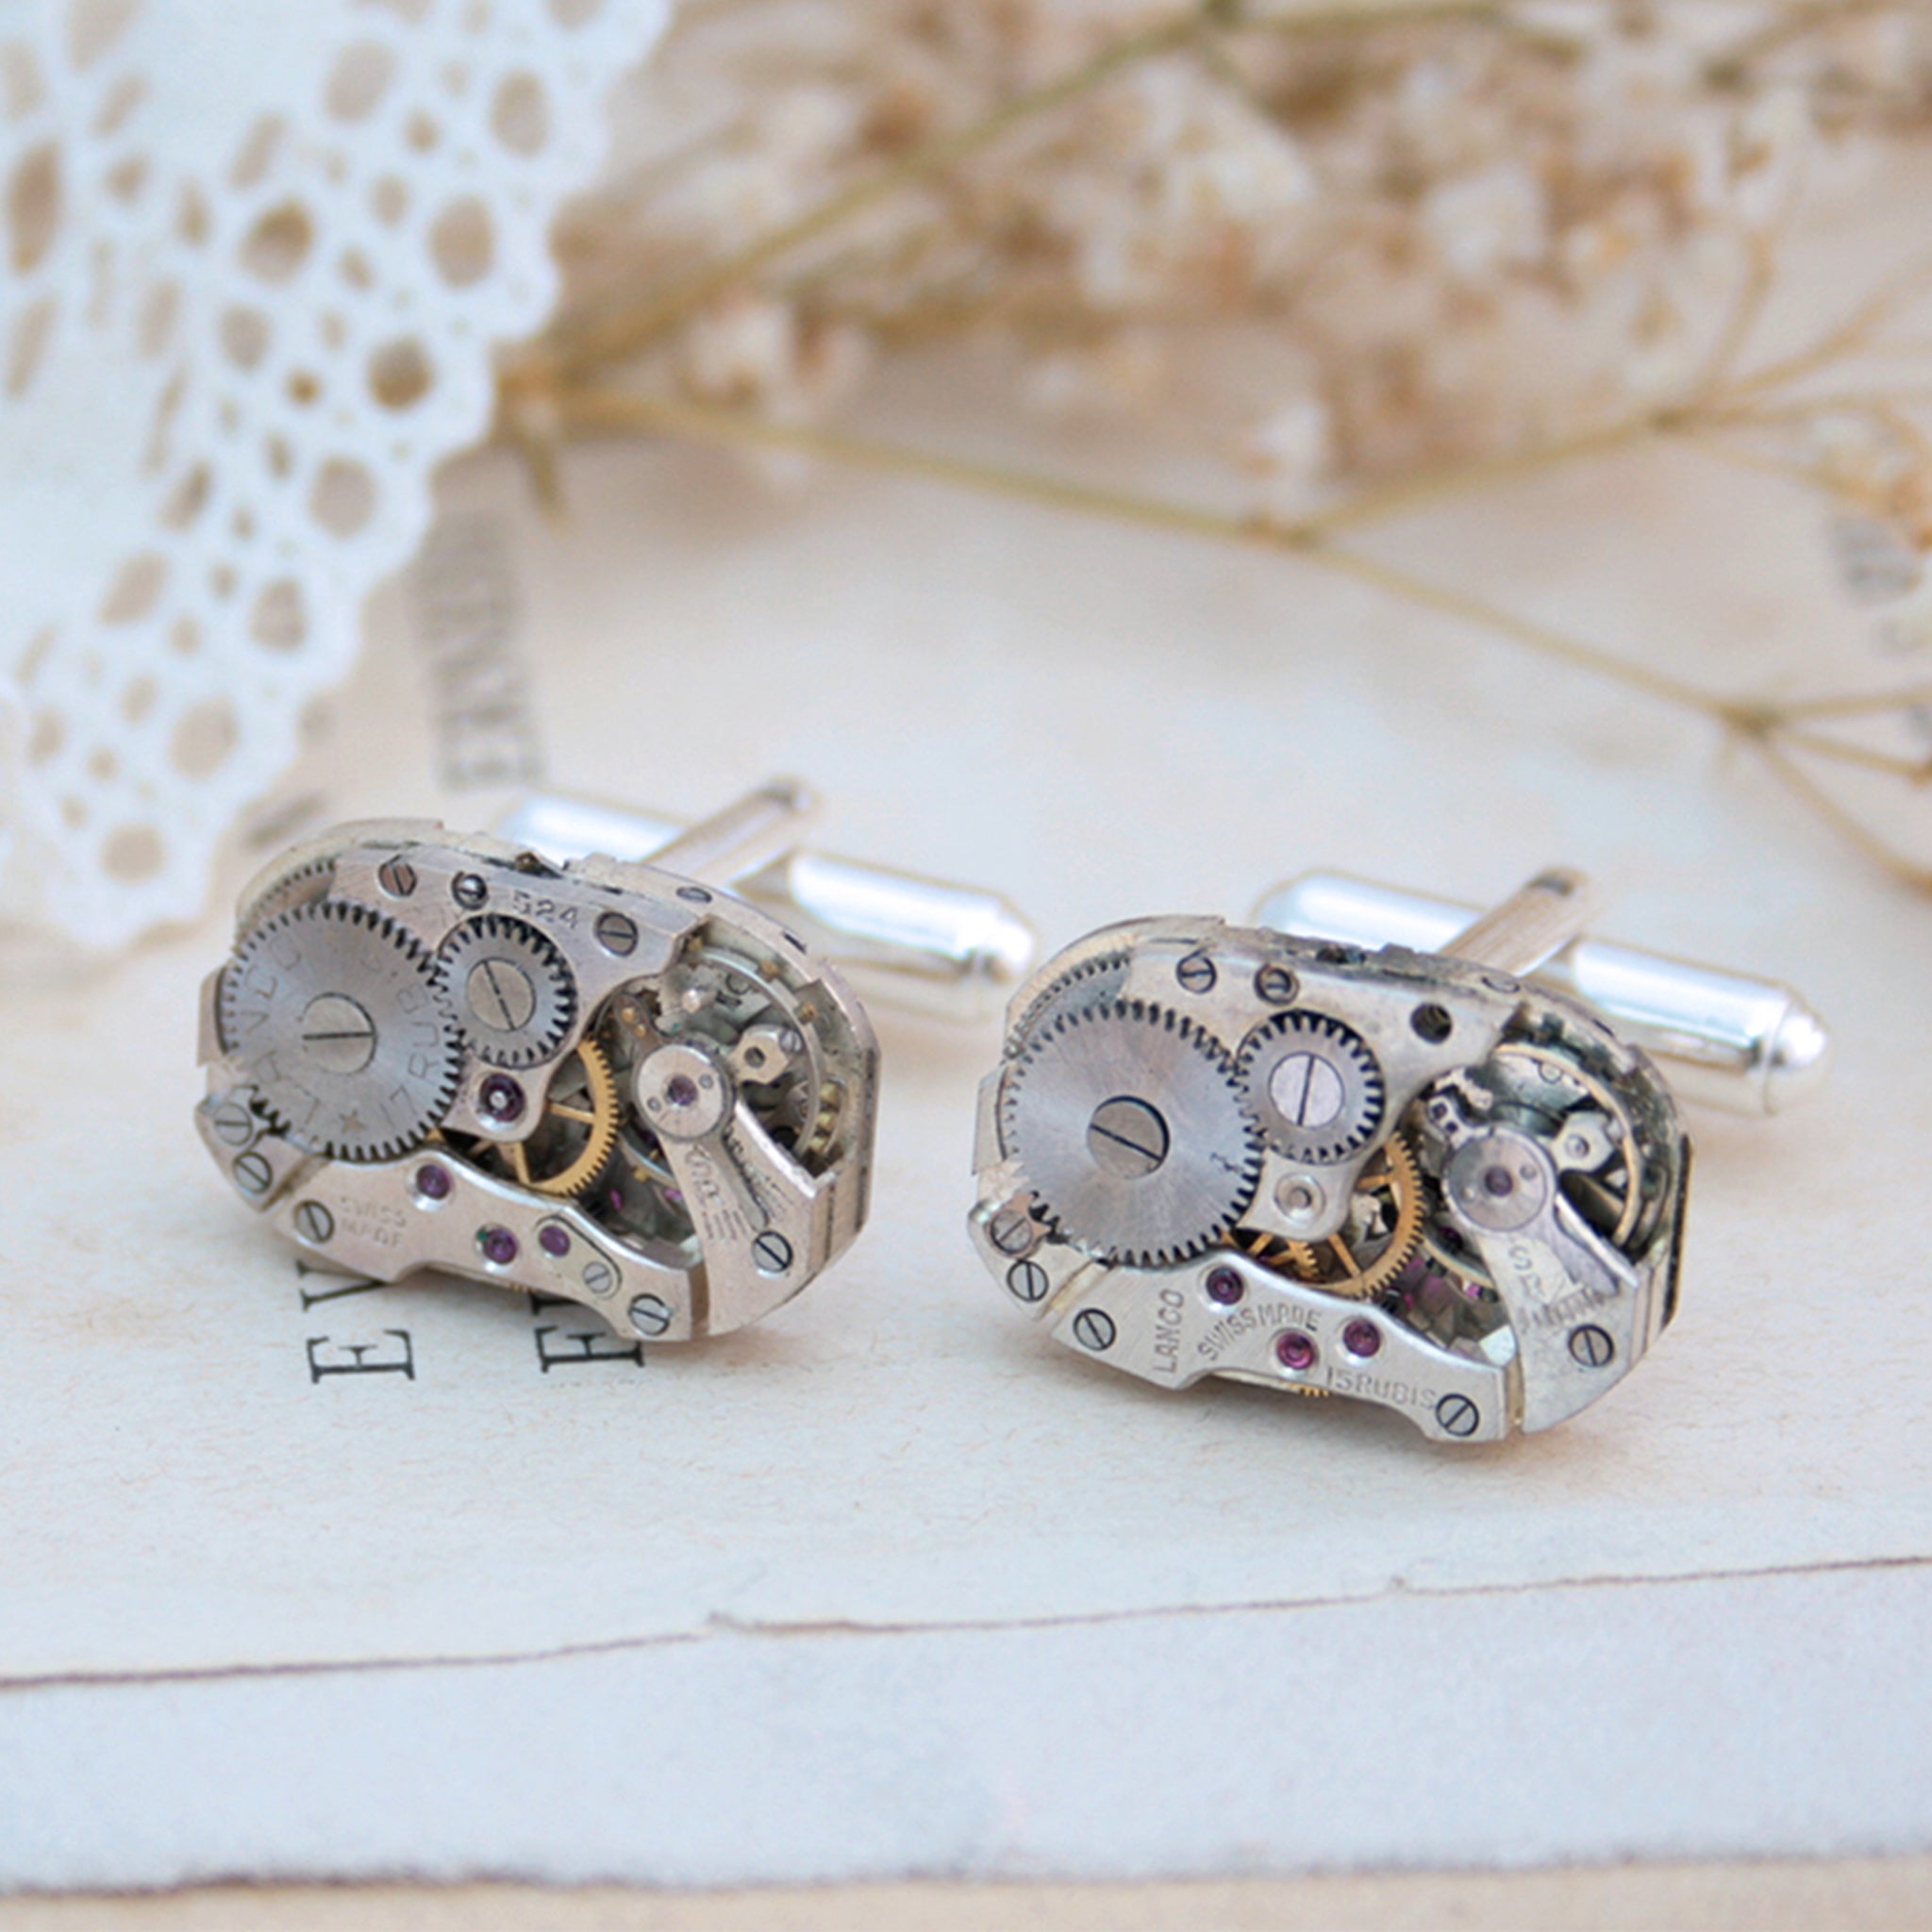 Cufflinks in Steampunk Style made of watch movements